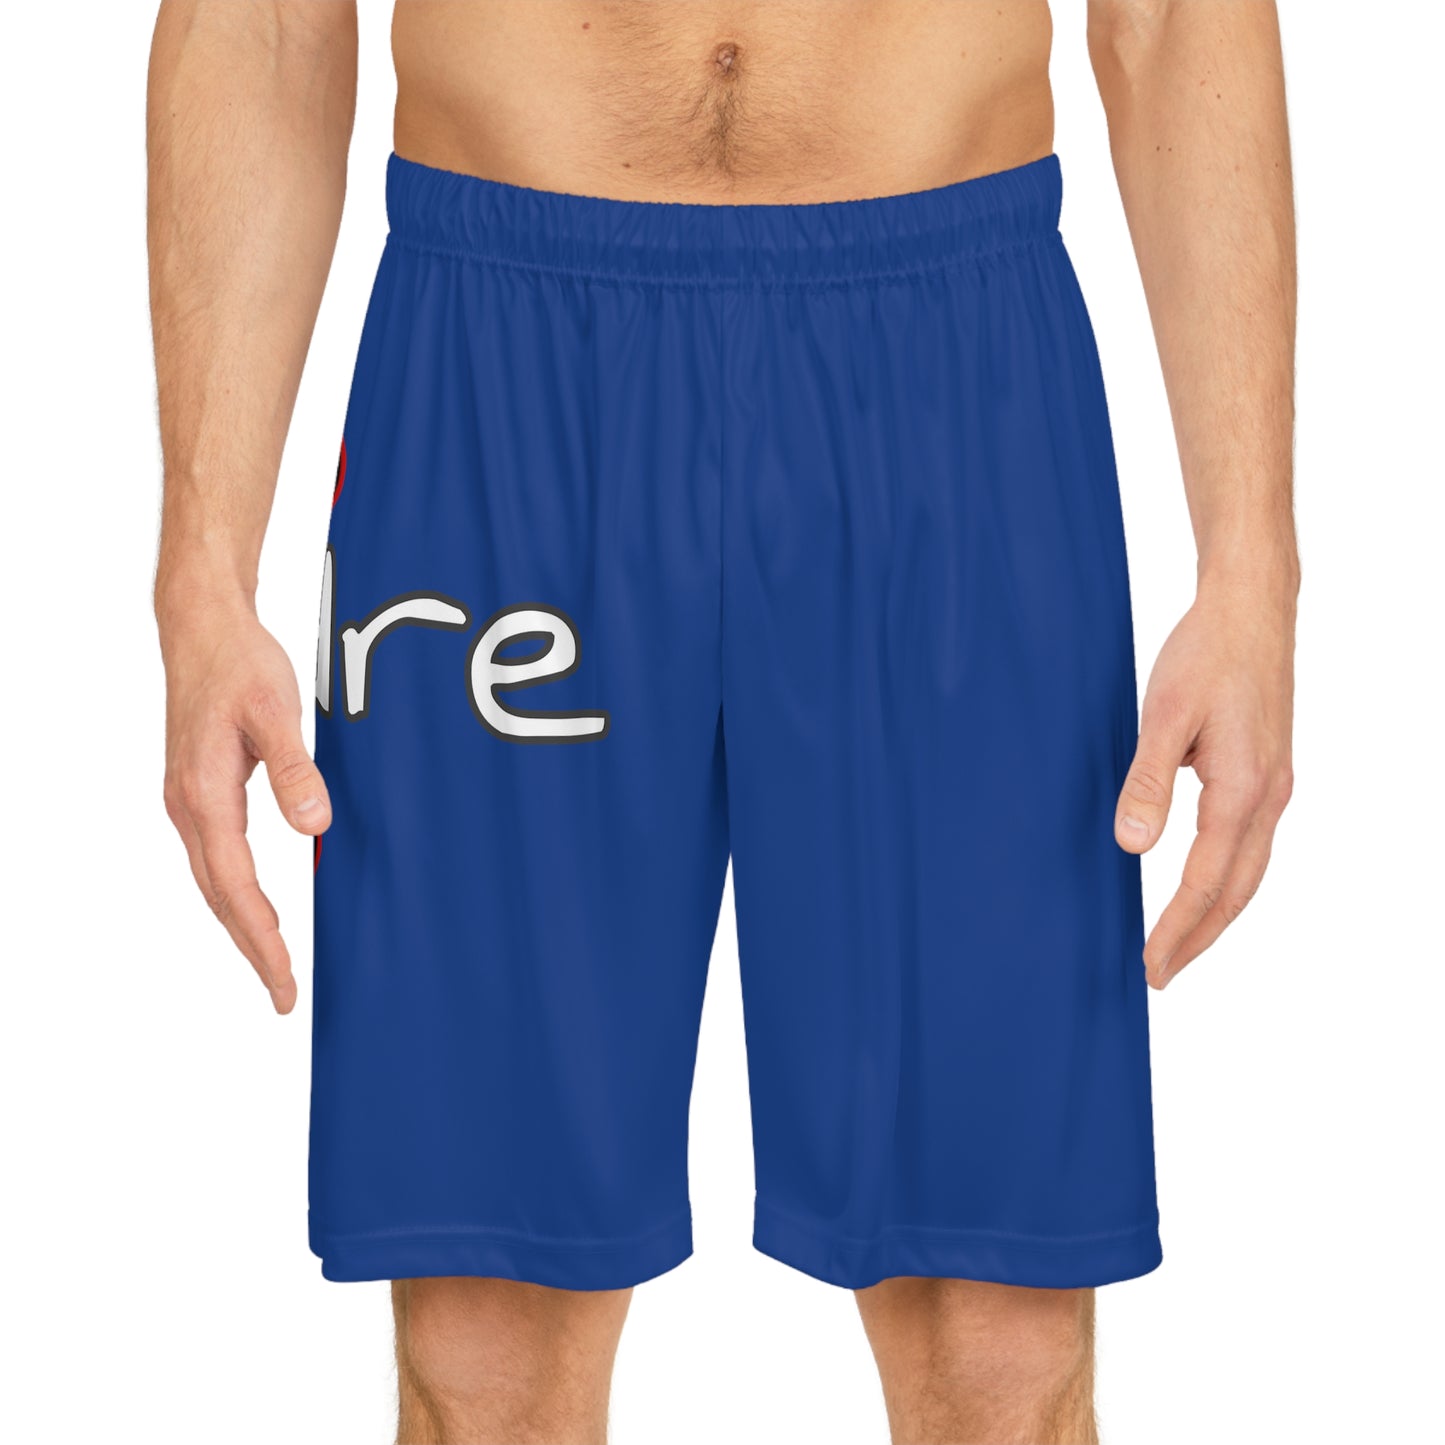 Basketball Shorts (Red/Blue)